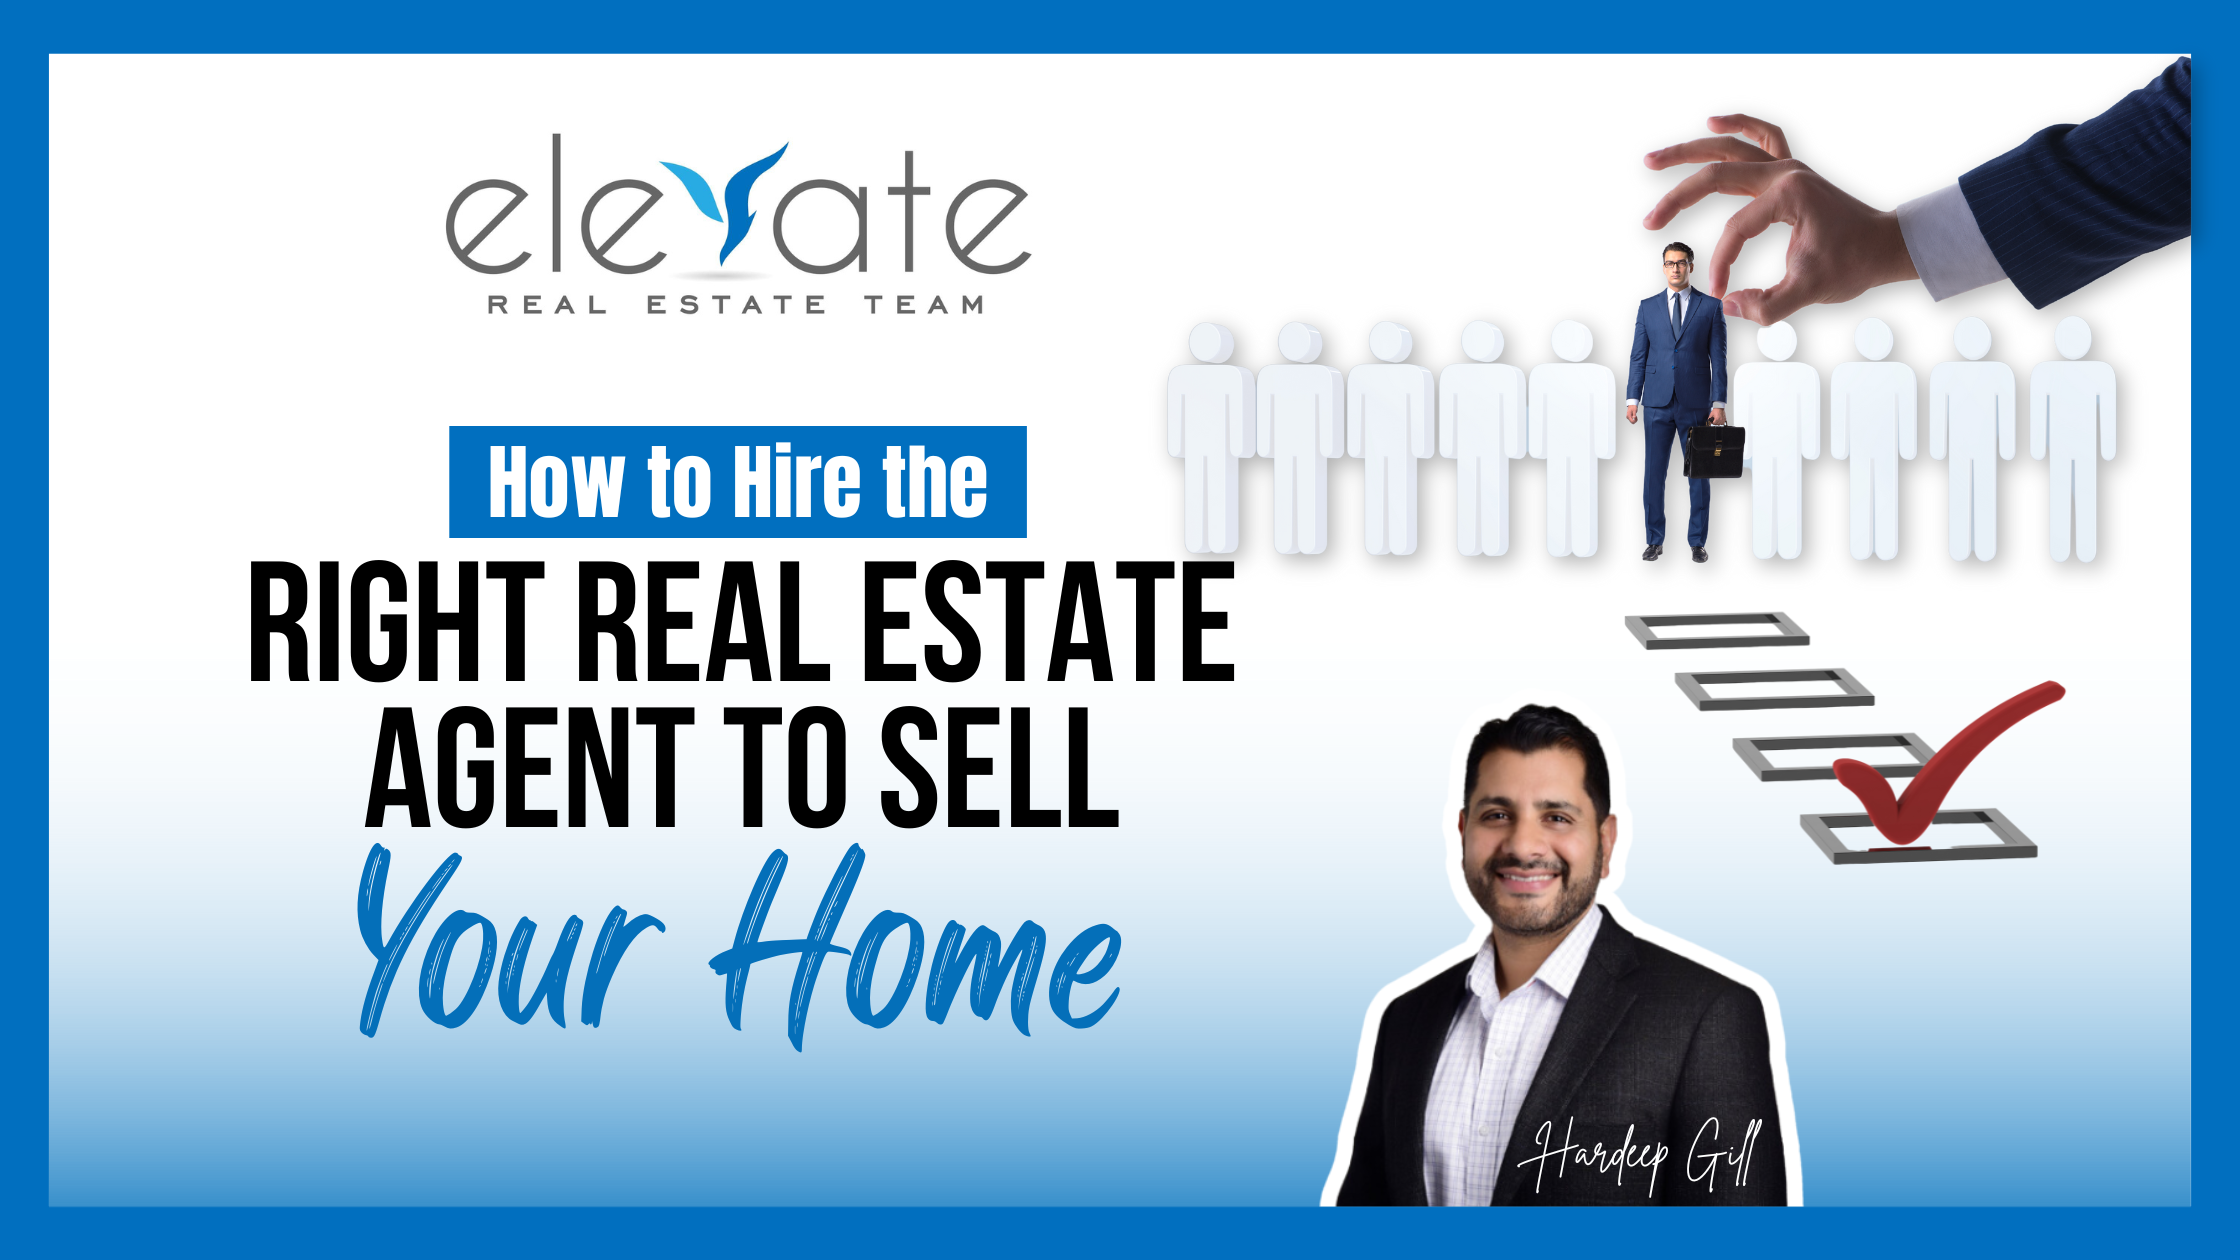 How to Hire the Right Real Estate Agent to Sell Your Home